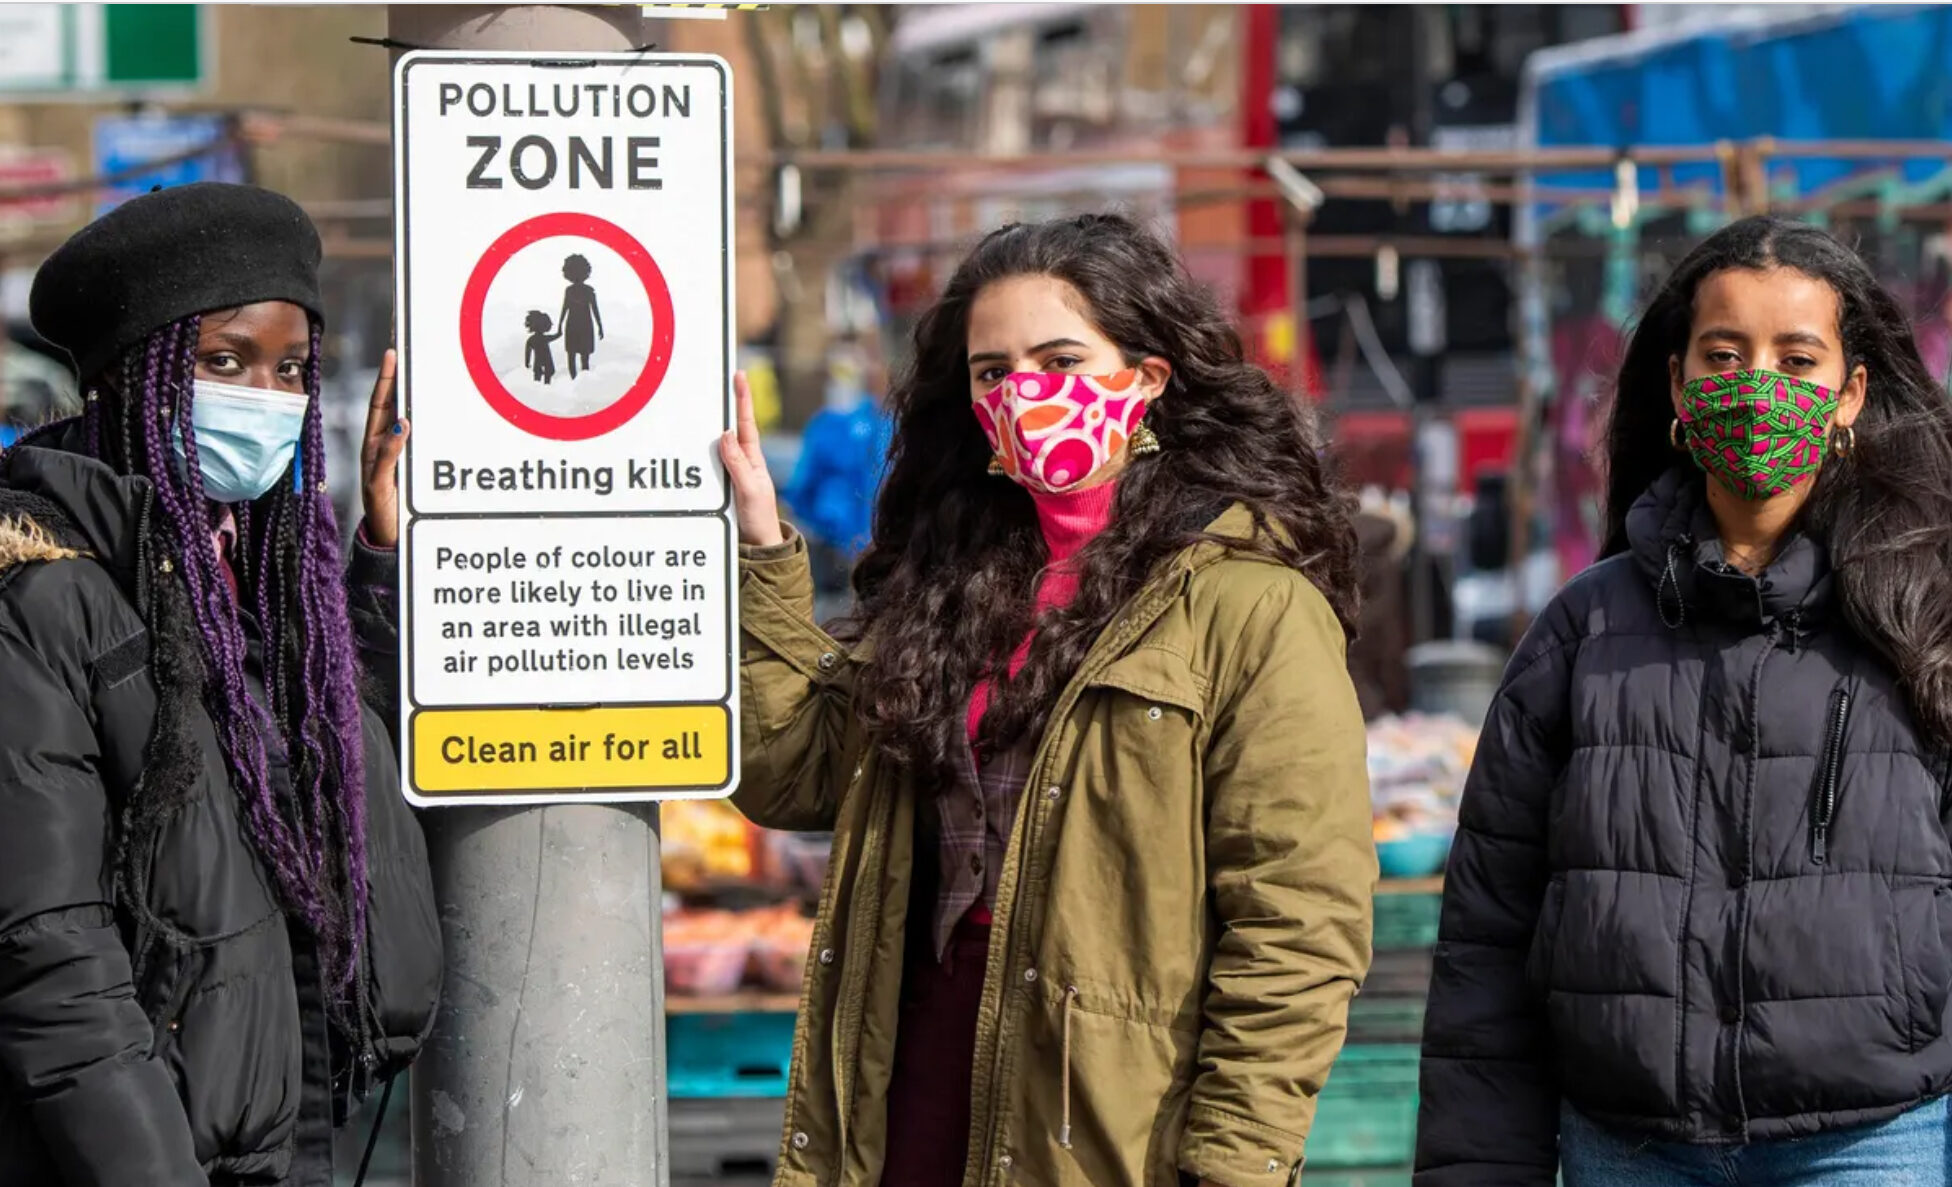 Three young people wearing winter jackets and facemasks stand on a city street next to a sign board mounted on a pole. Designed in the style of an official road sign, the board shows a parent and child in a red circle. Text warns about dangerous air pollution in the area.